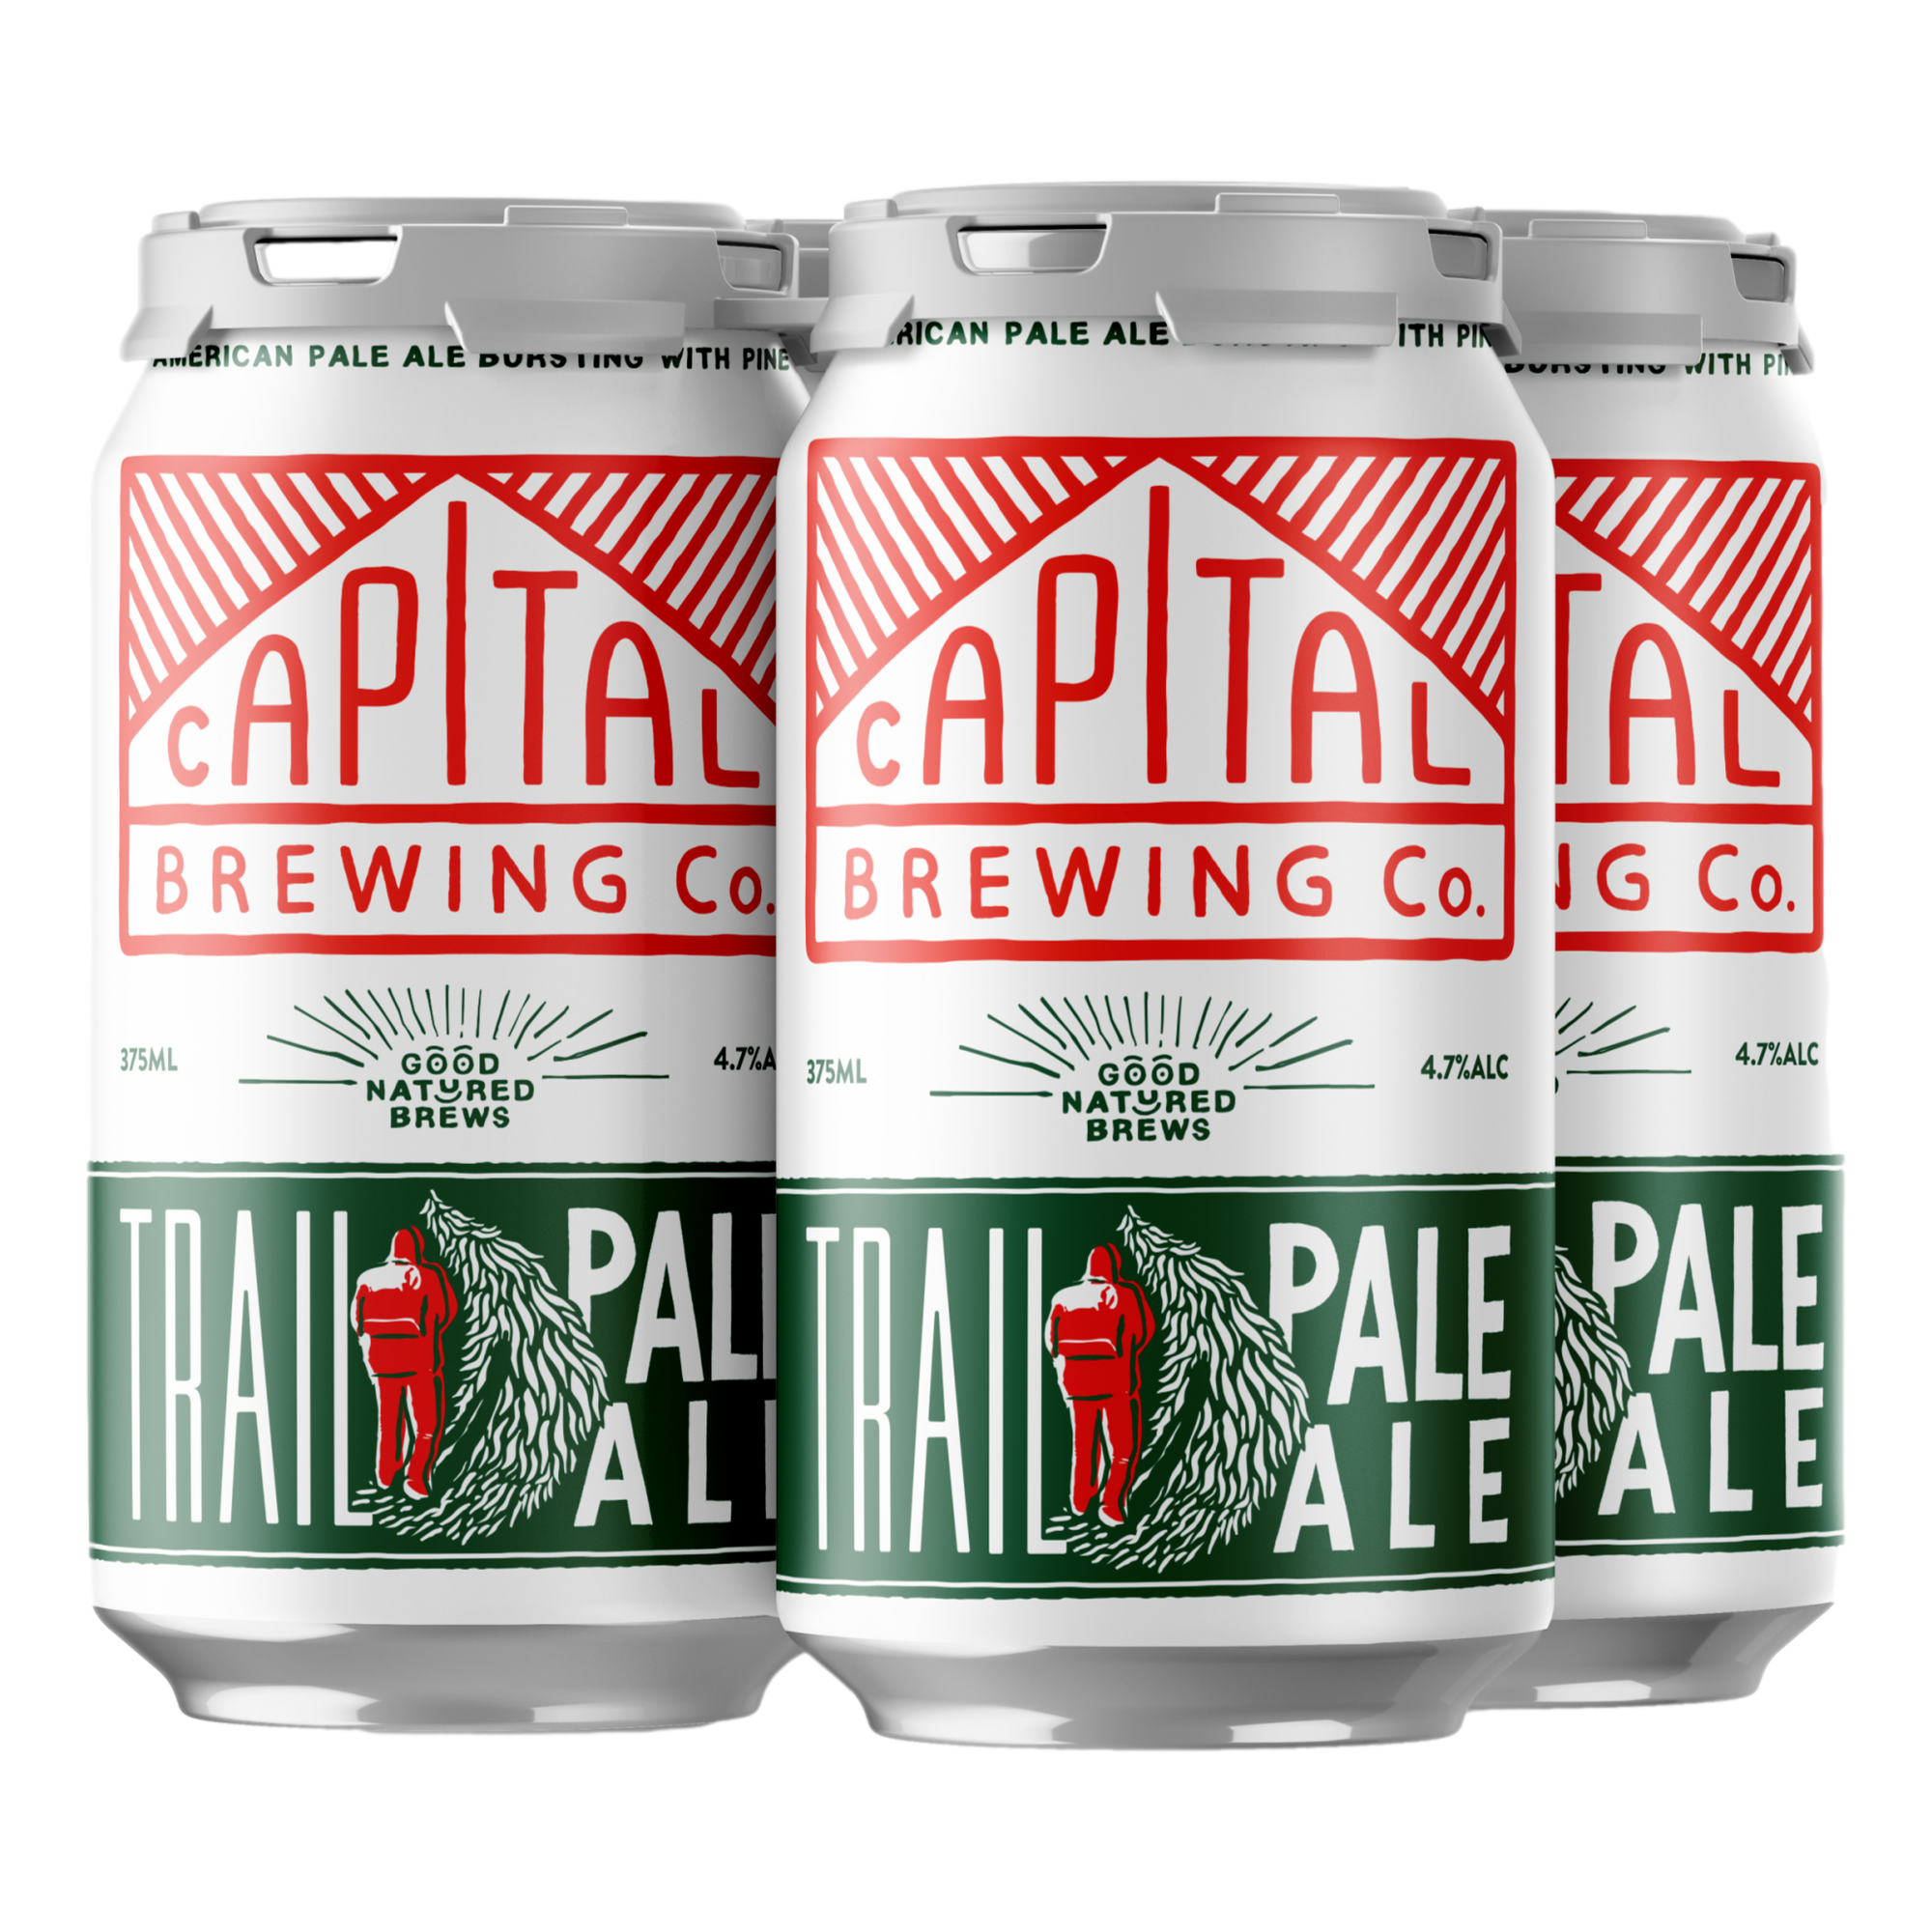 Capital Brewing Co. Trail Pale Ale 375ml Can 4 Pack